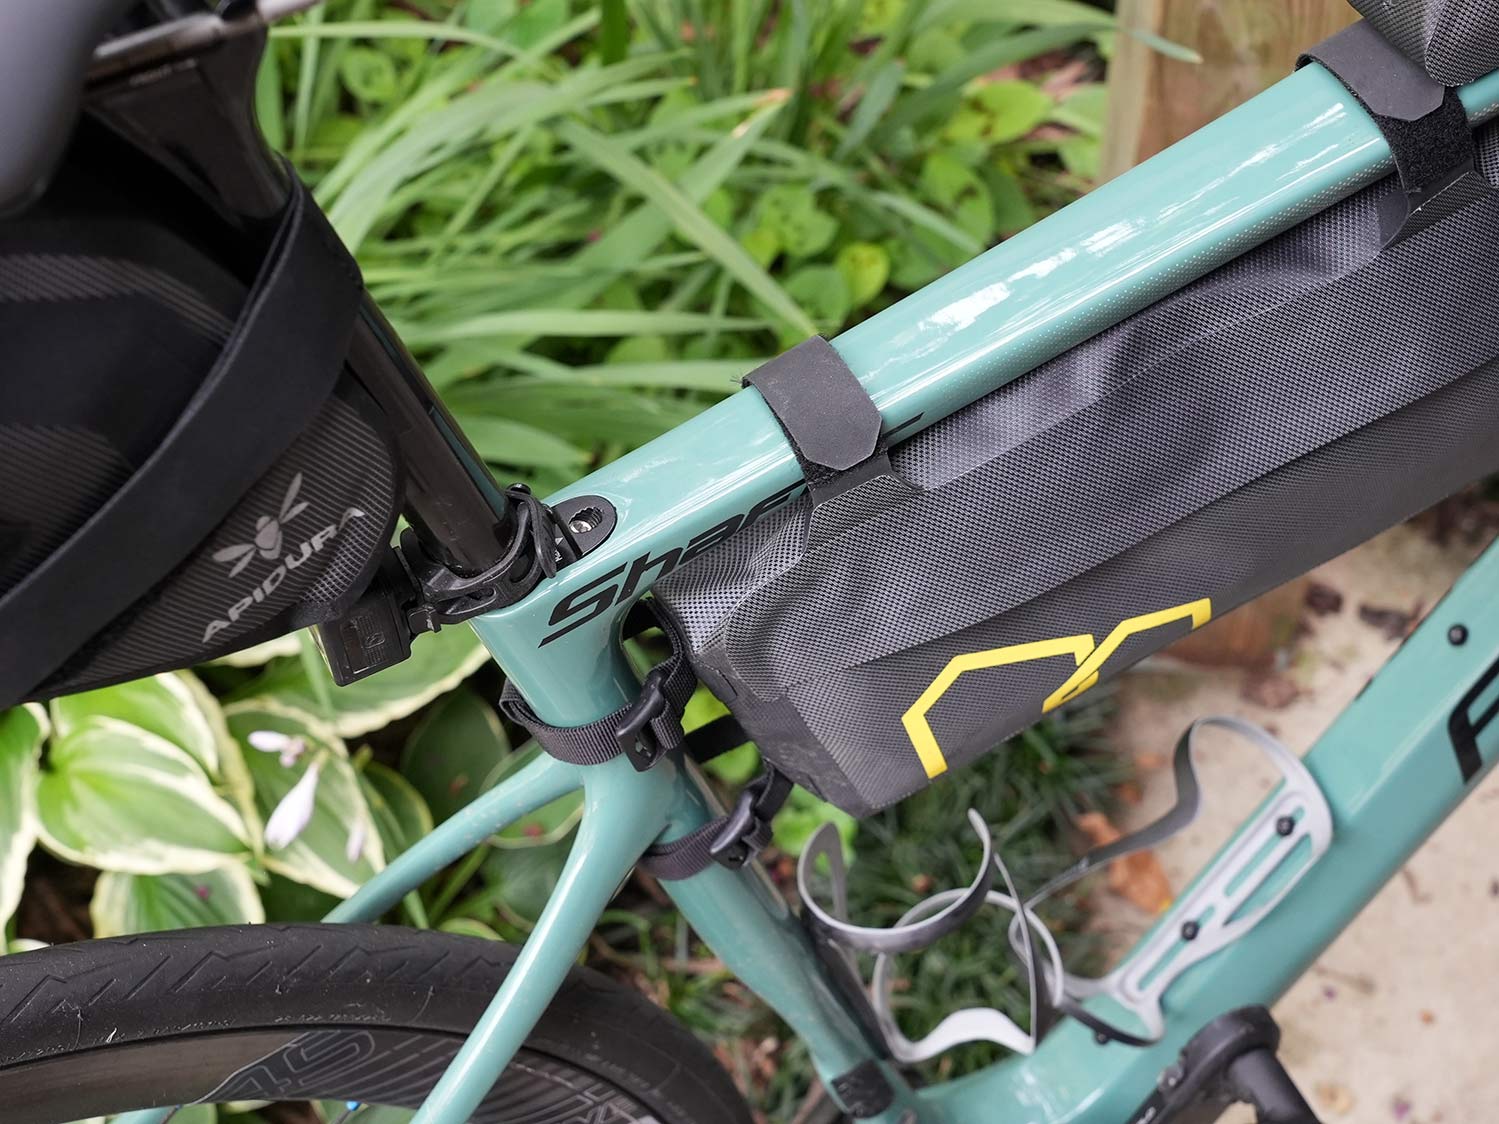 apidura expedition frame pack on a bike